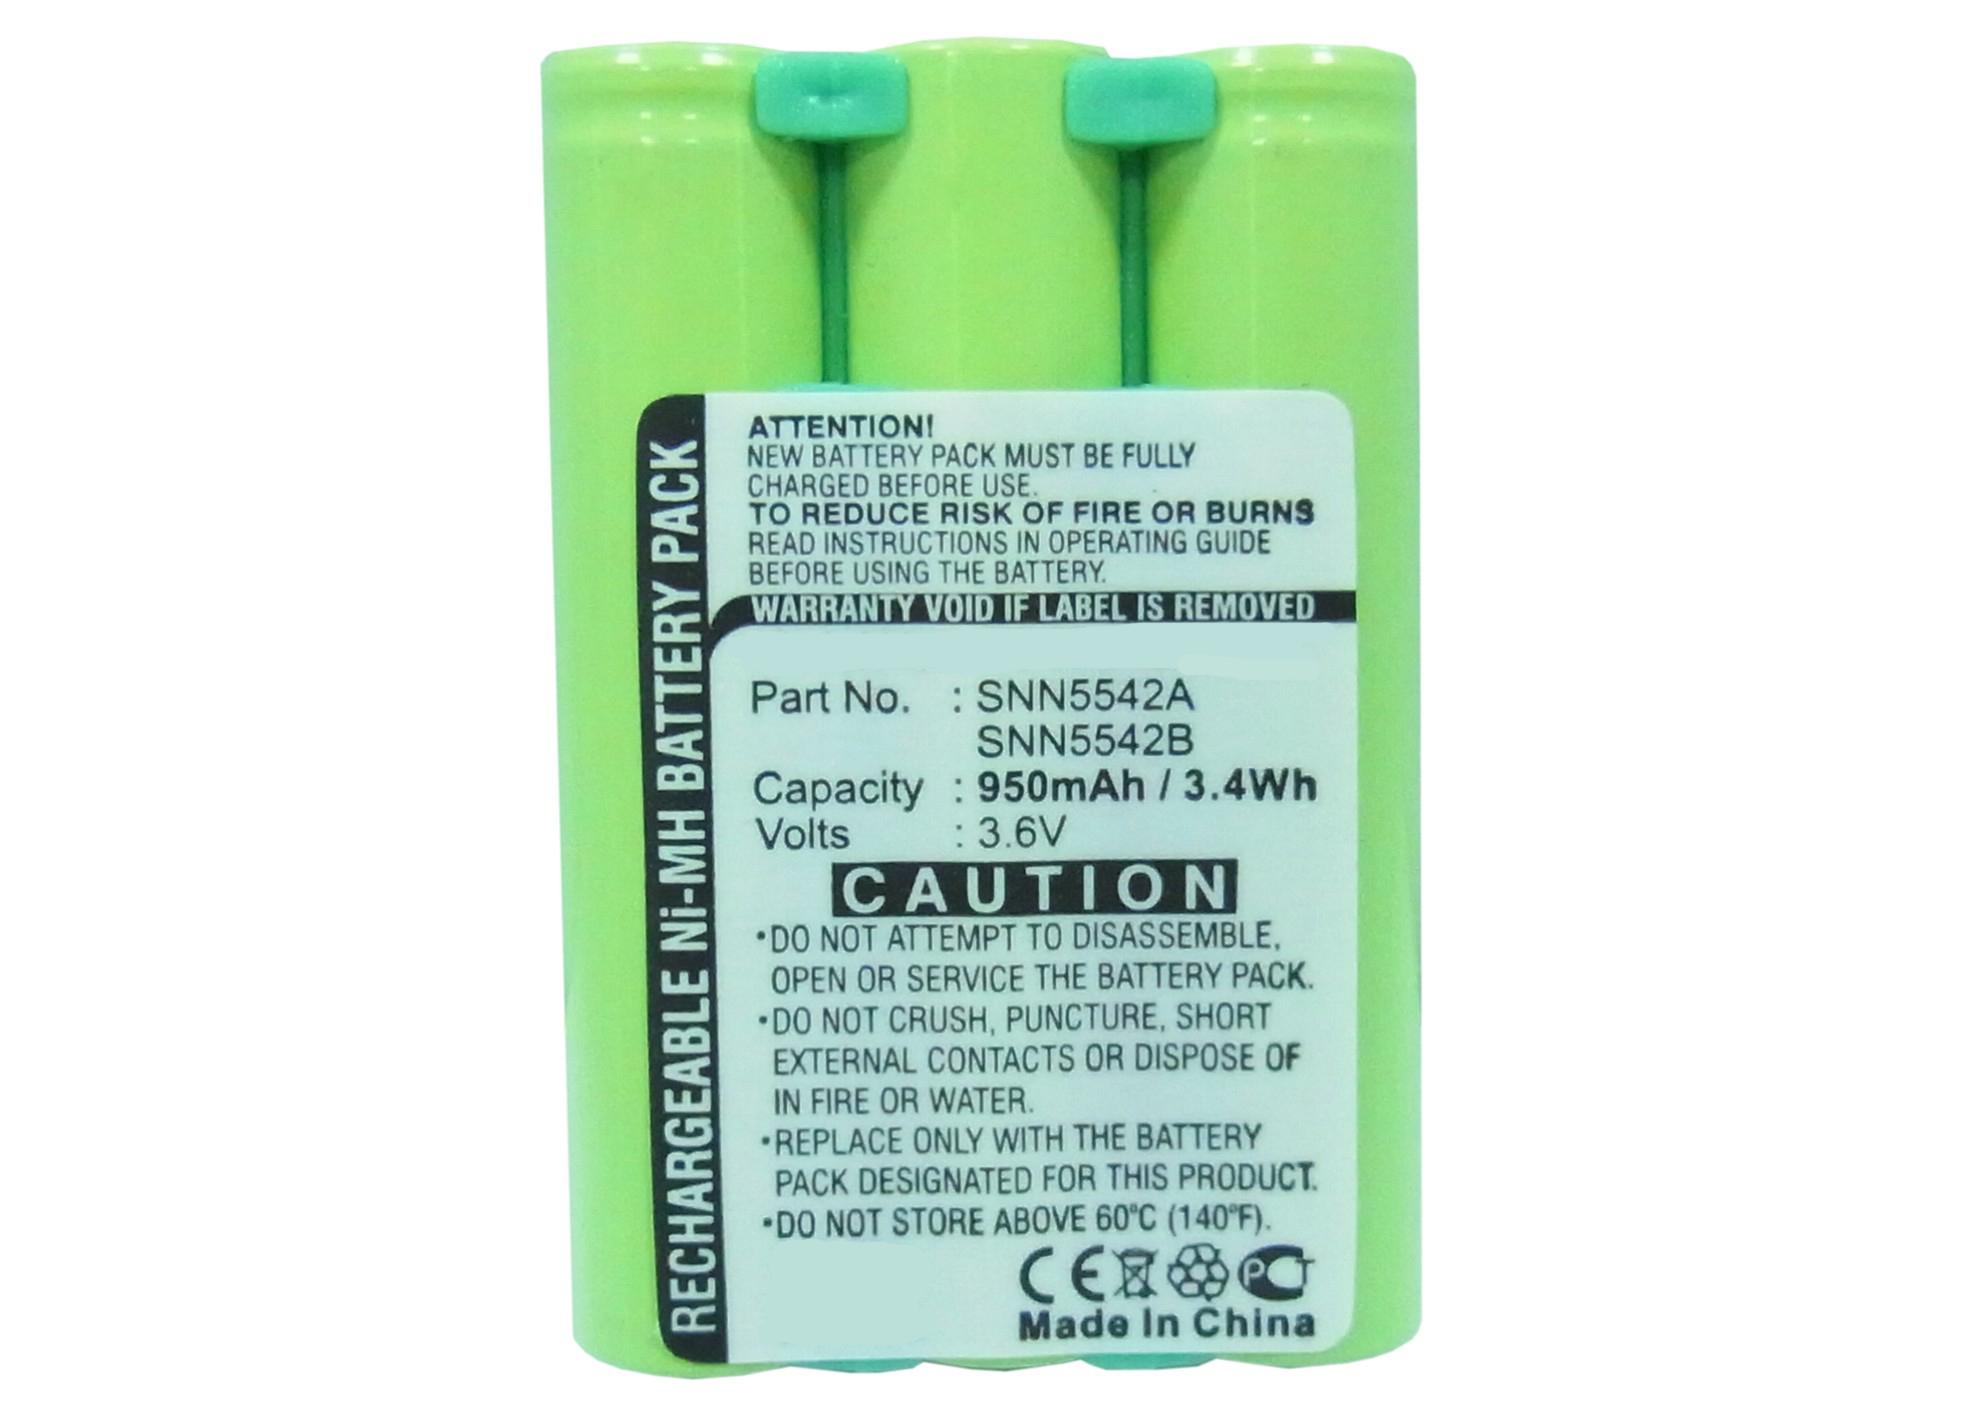 Synergy Digital Cell Phone Battery, Compatible with Motorola SNN5542A, SNN5542B Cell Phone Battery (3.6V, Ni-MH, 800mAh)